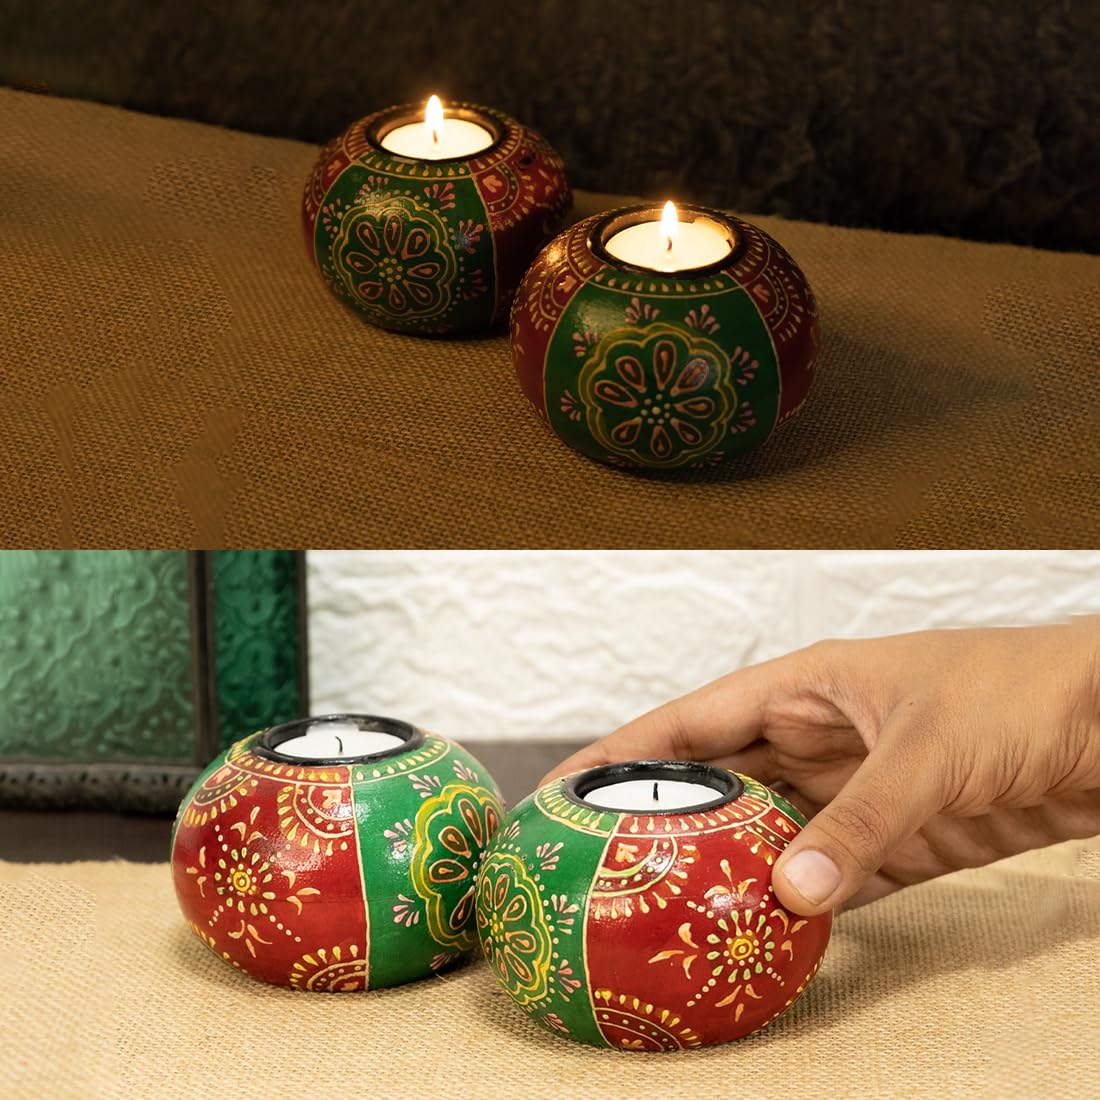 Ekhasa Tealight Candle Holder for Home Décor | Candle Stand for Diwali Decoration and Table Décor | Indoor and Outdoor Festival and Decorative Candles Gift Items (Handpainted Wooden - Set of 2)